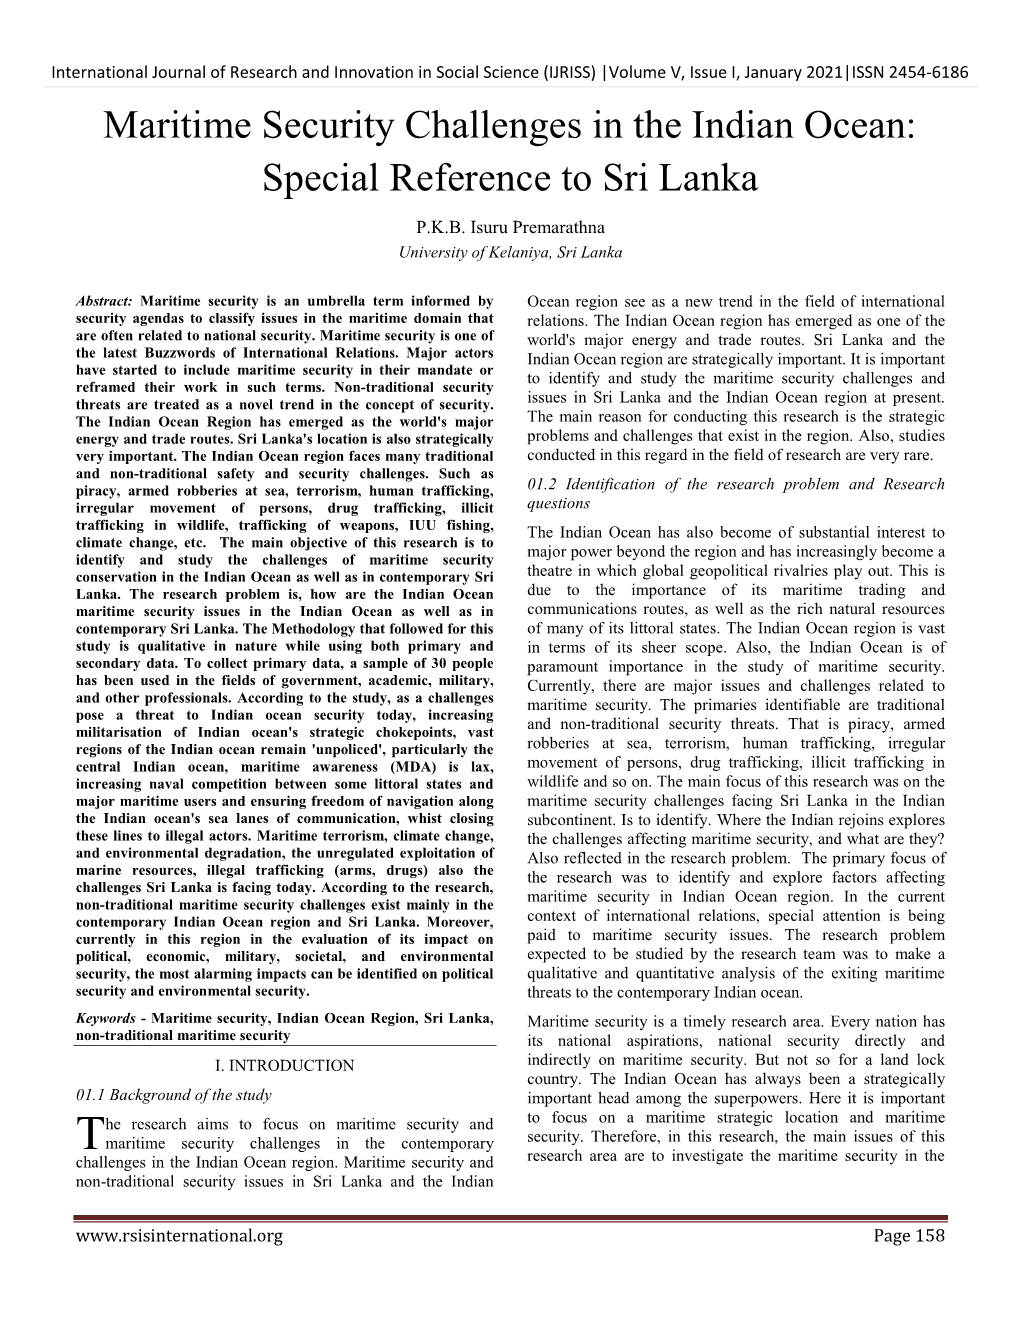 Maritime Security Challenges in the Indian Ocean: Special Reference to Sri Lanka